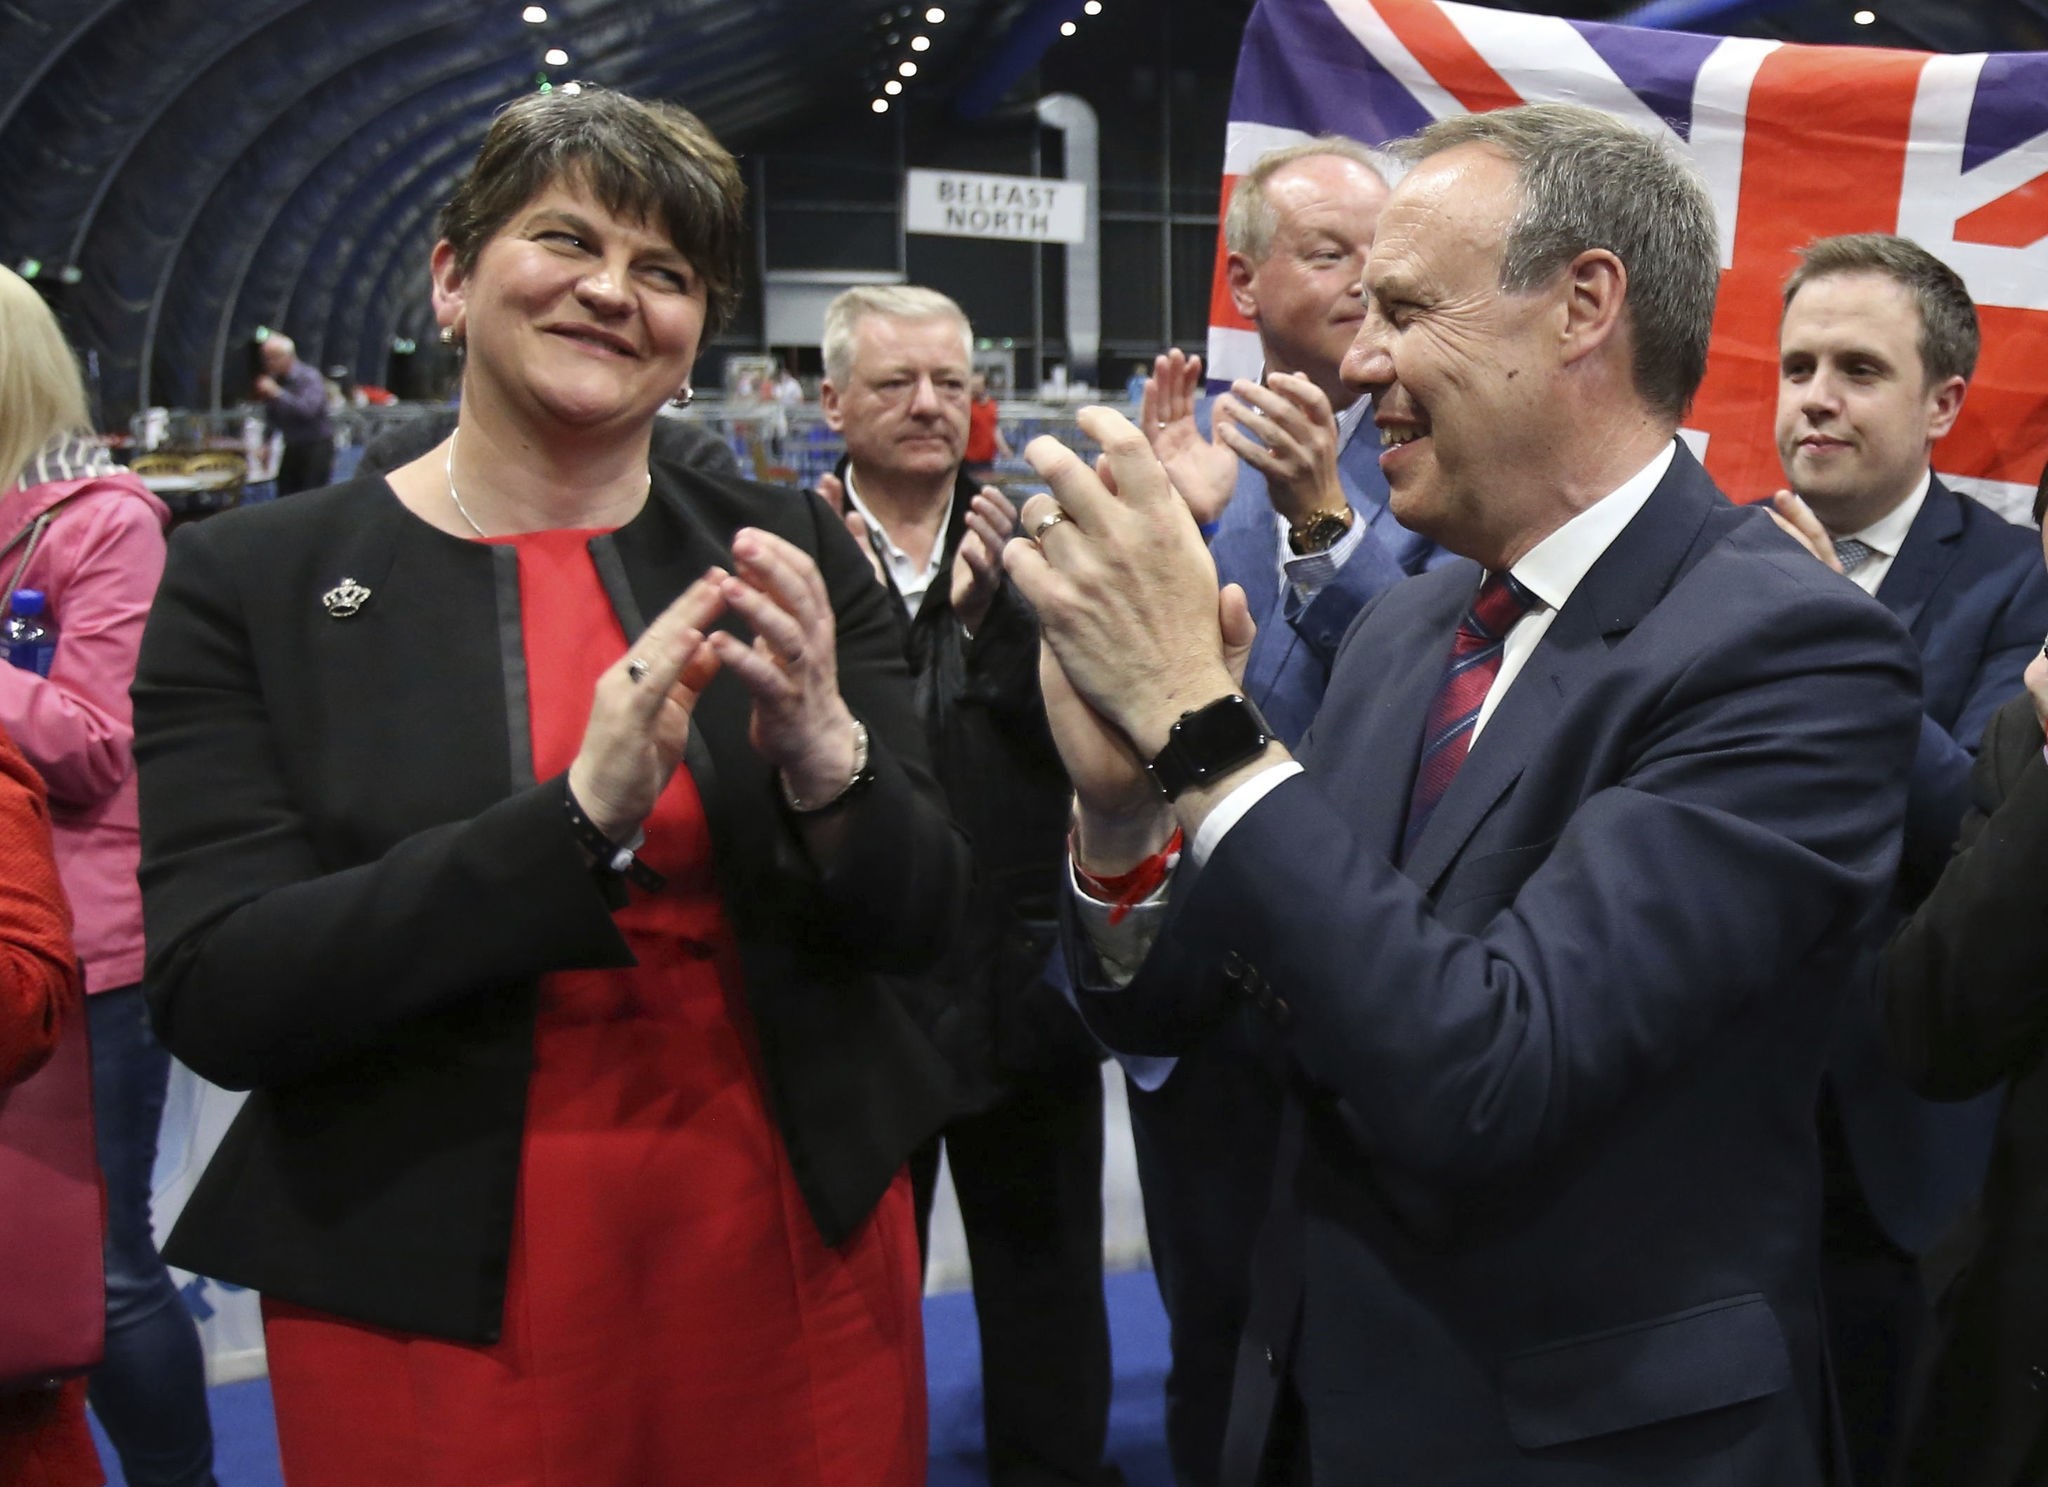 DUP leader Arlene Foster, left, and deputy leader Nigel Dodds cheer as Emma Little Pengelly is elected to the South Belfast constituency on June 9, 2017. (AP Photo)